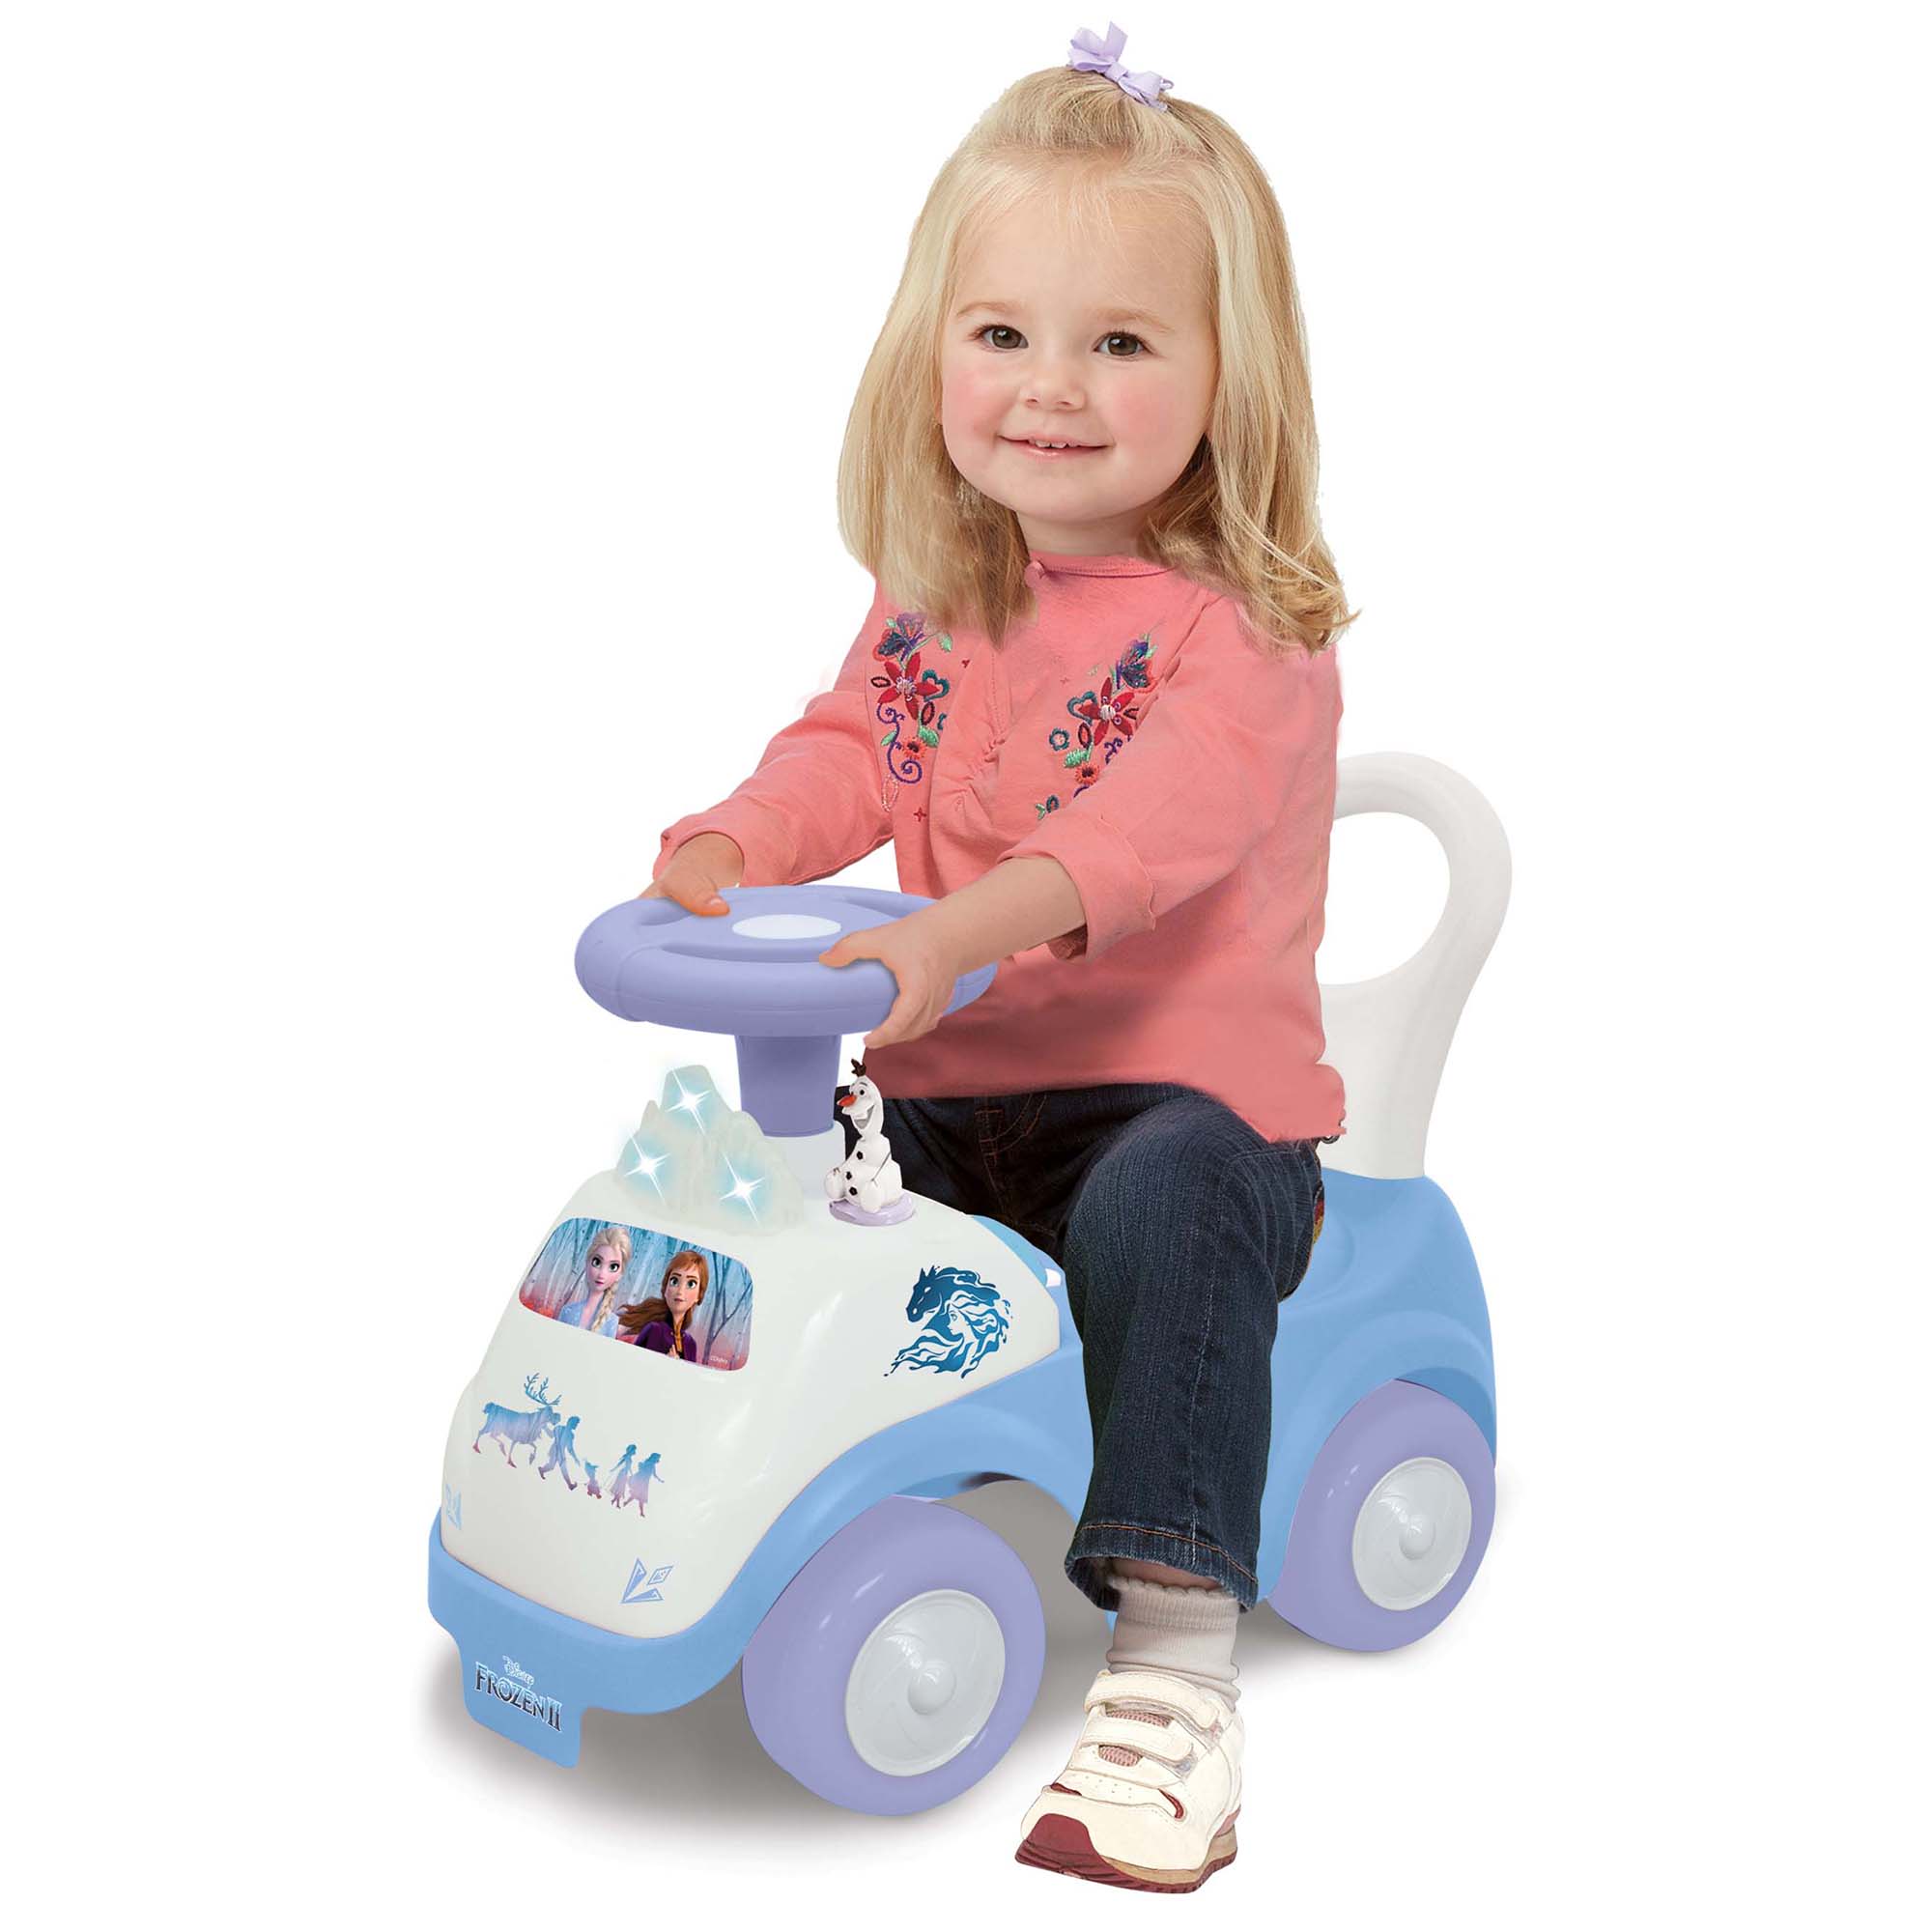 Disney: Frozen 2 Lights N' Sounds Ride-on, Toddlers 12-36 mos - image 3 of 5